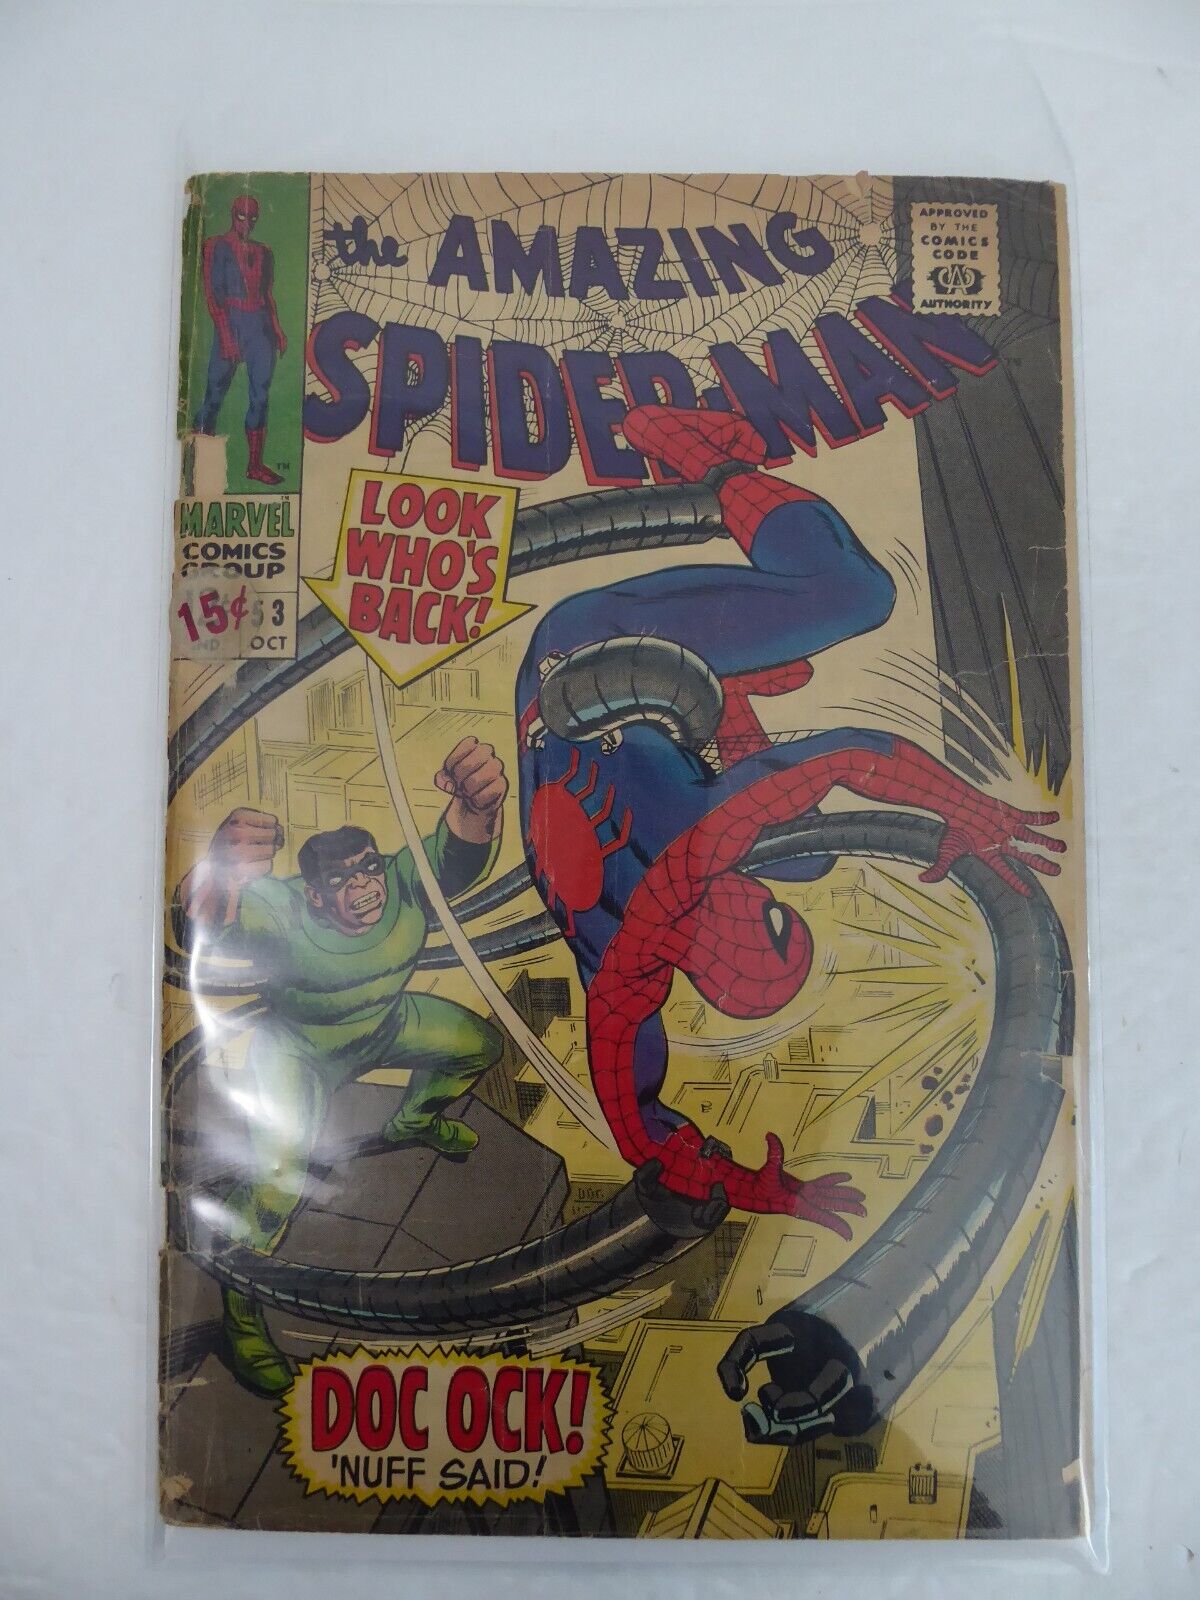 Amazing Spider-Man #53 Doctor Octopus Peter & Gwen Stacy's 1st Date 1967